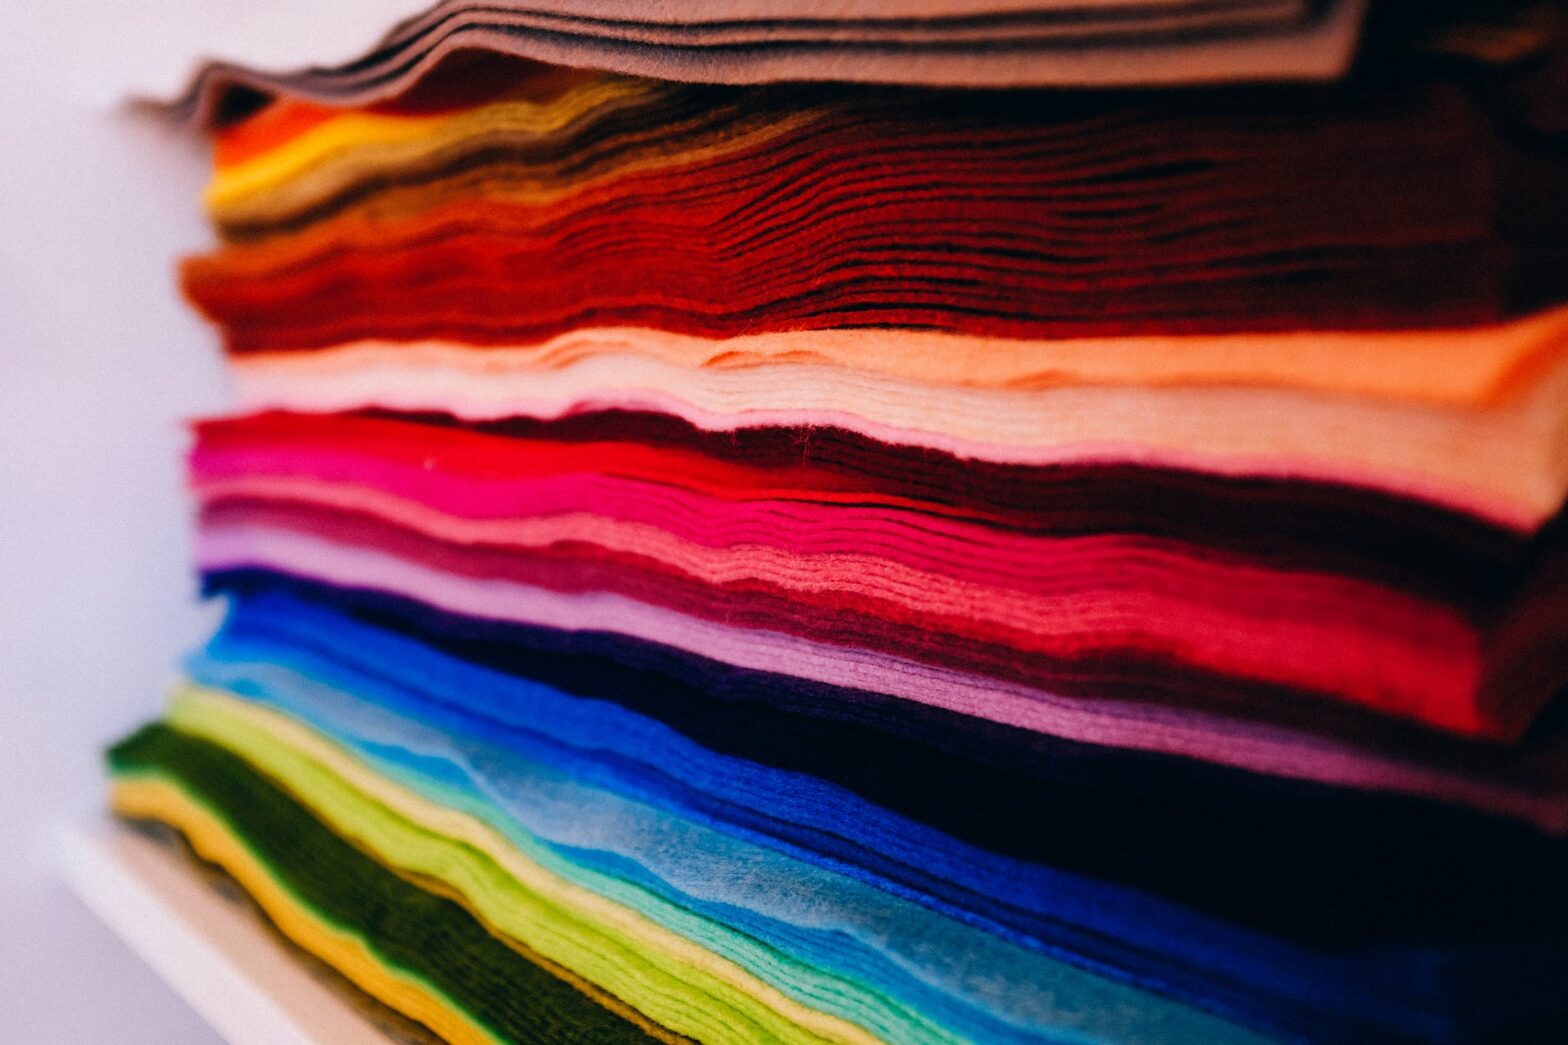 Textile Colors Industry